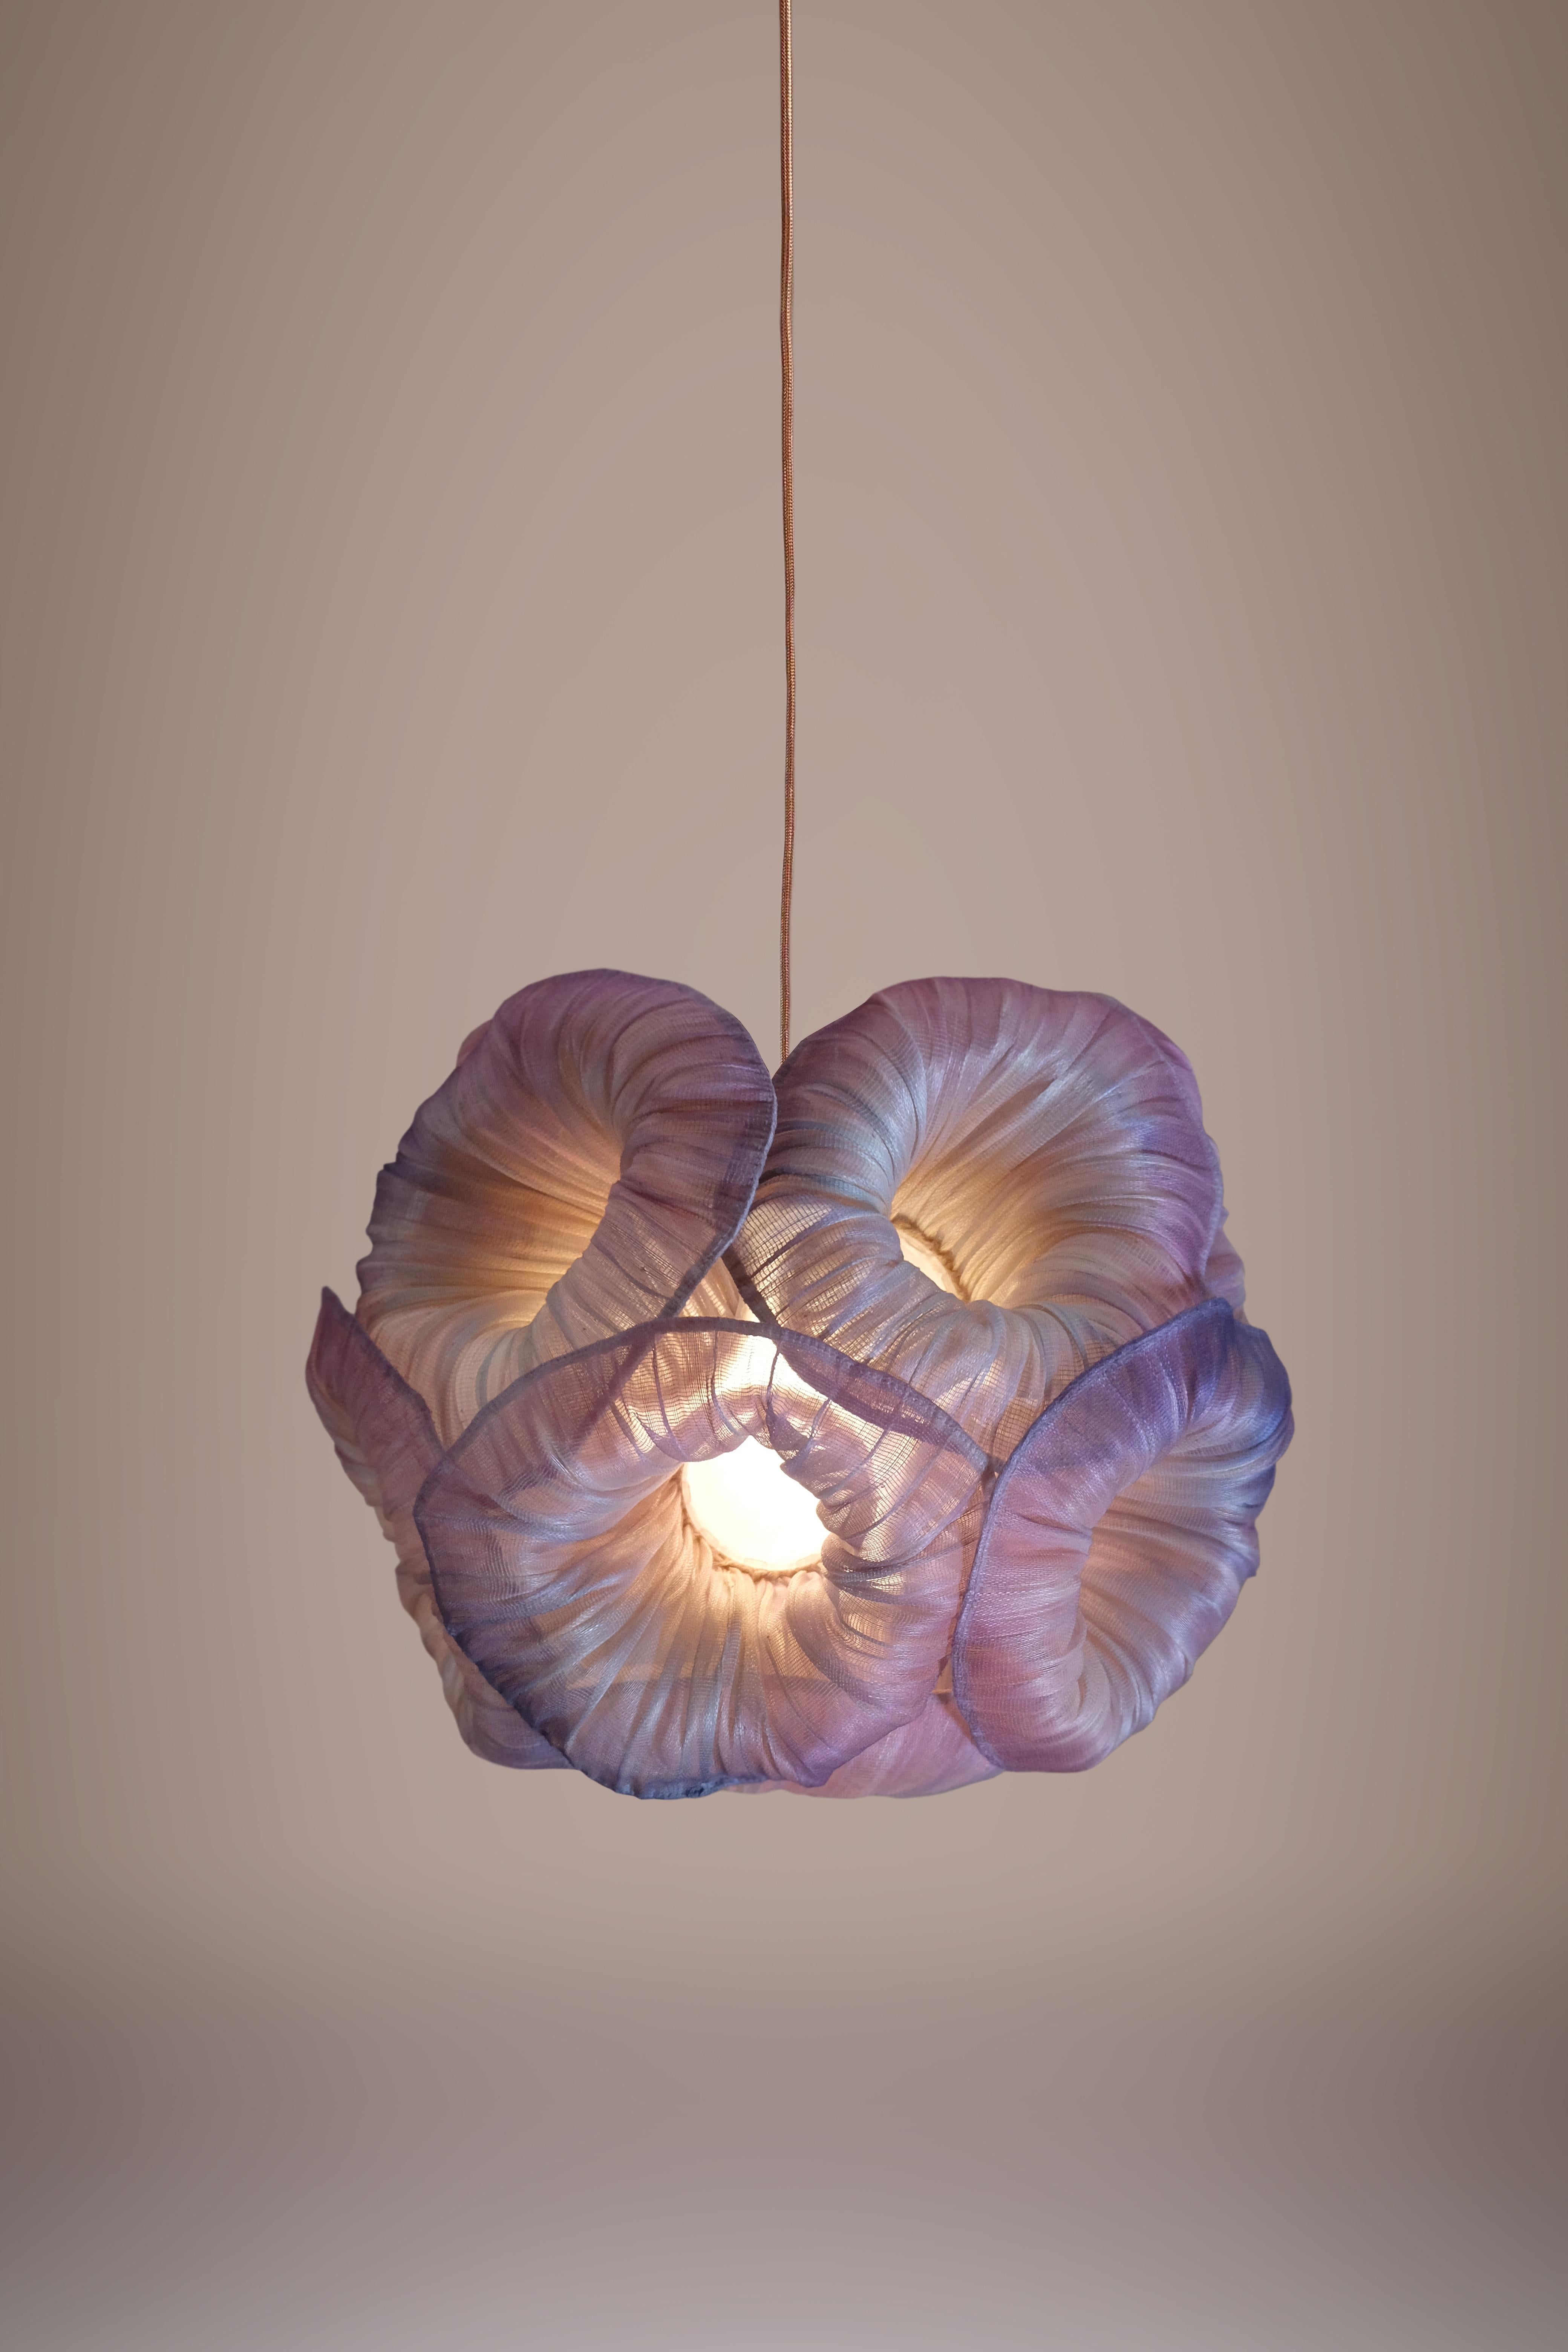 The Anemone pendant lamp is named for the soft, brightly colored sea creatures that look like a flower and often live on rocks under water. A little mermaid’s best friend, the Anemone Lamp is inspired by sea corals to brighten up your life.

This